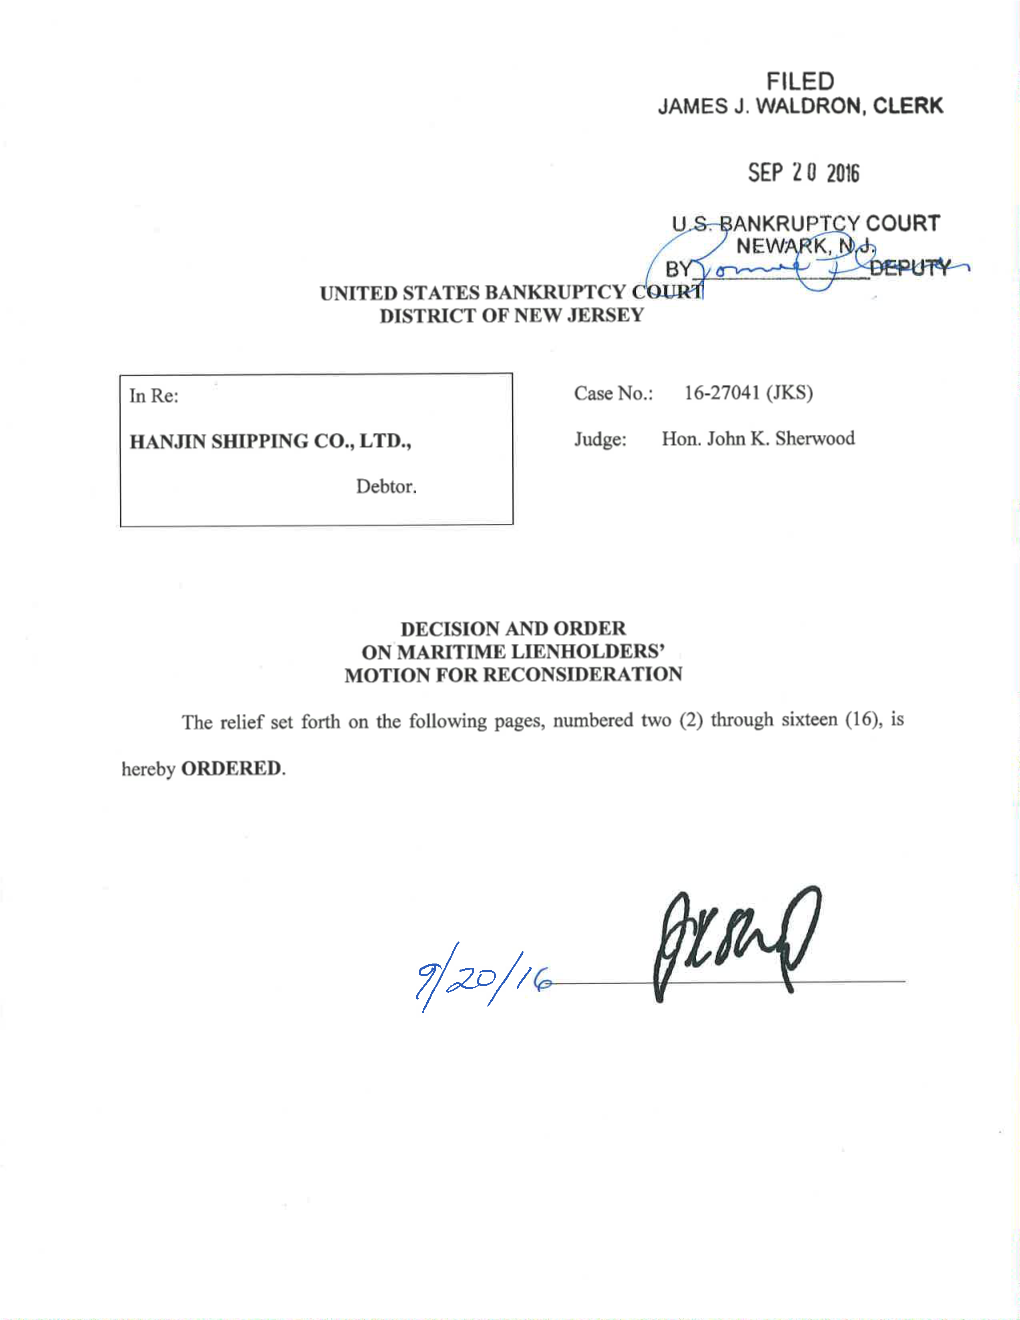 In Re Hanjin-Decision and Order on Maritime Lienholders Motion For